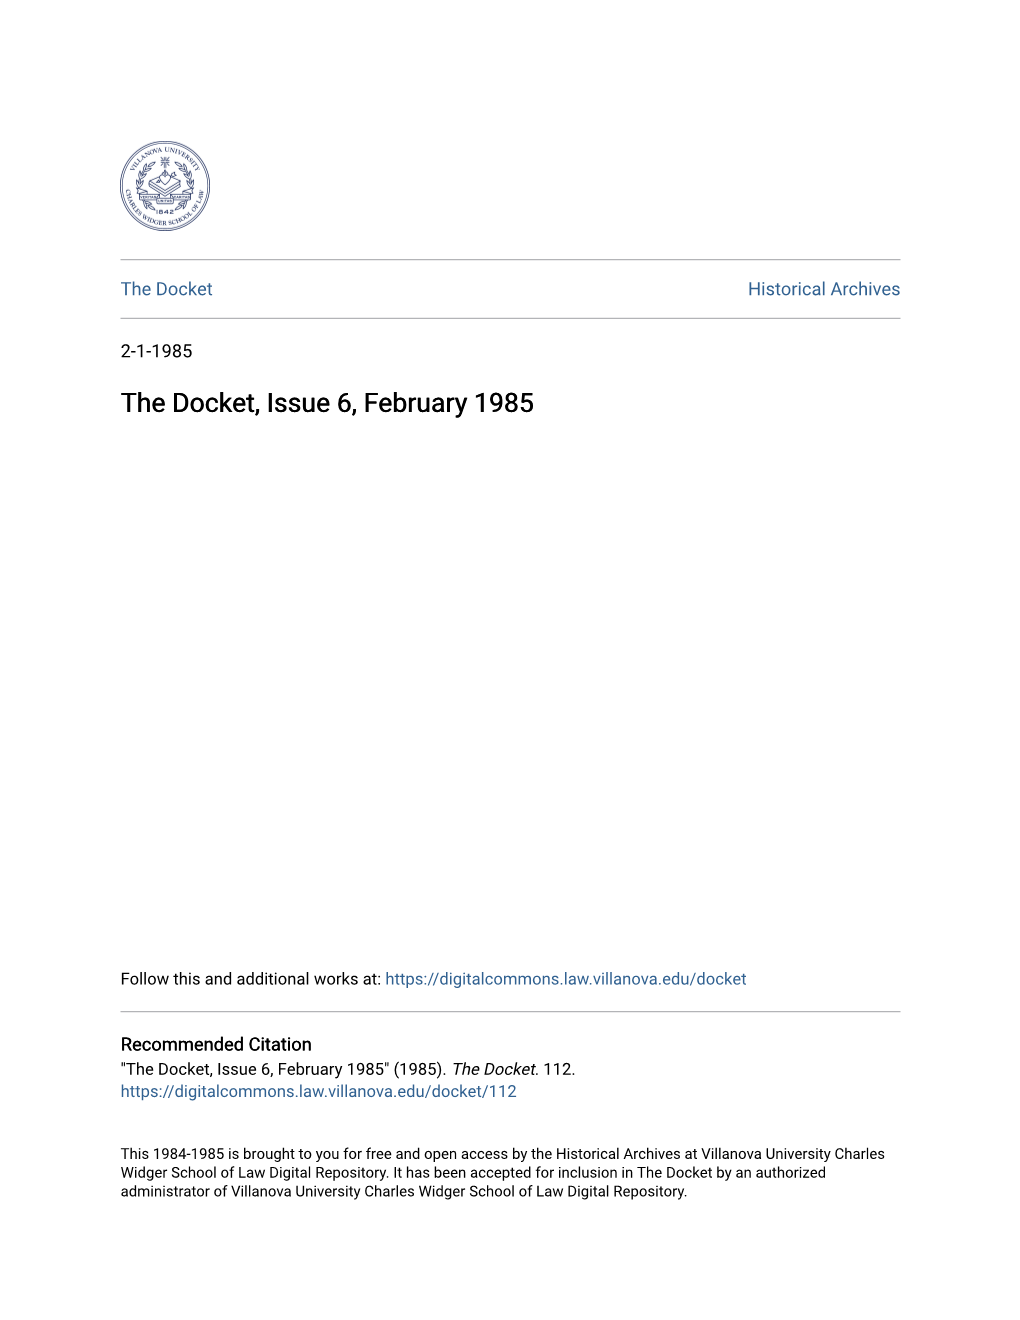 The Docket, Issue 6, February 1985